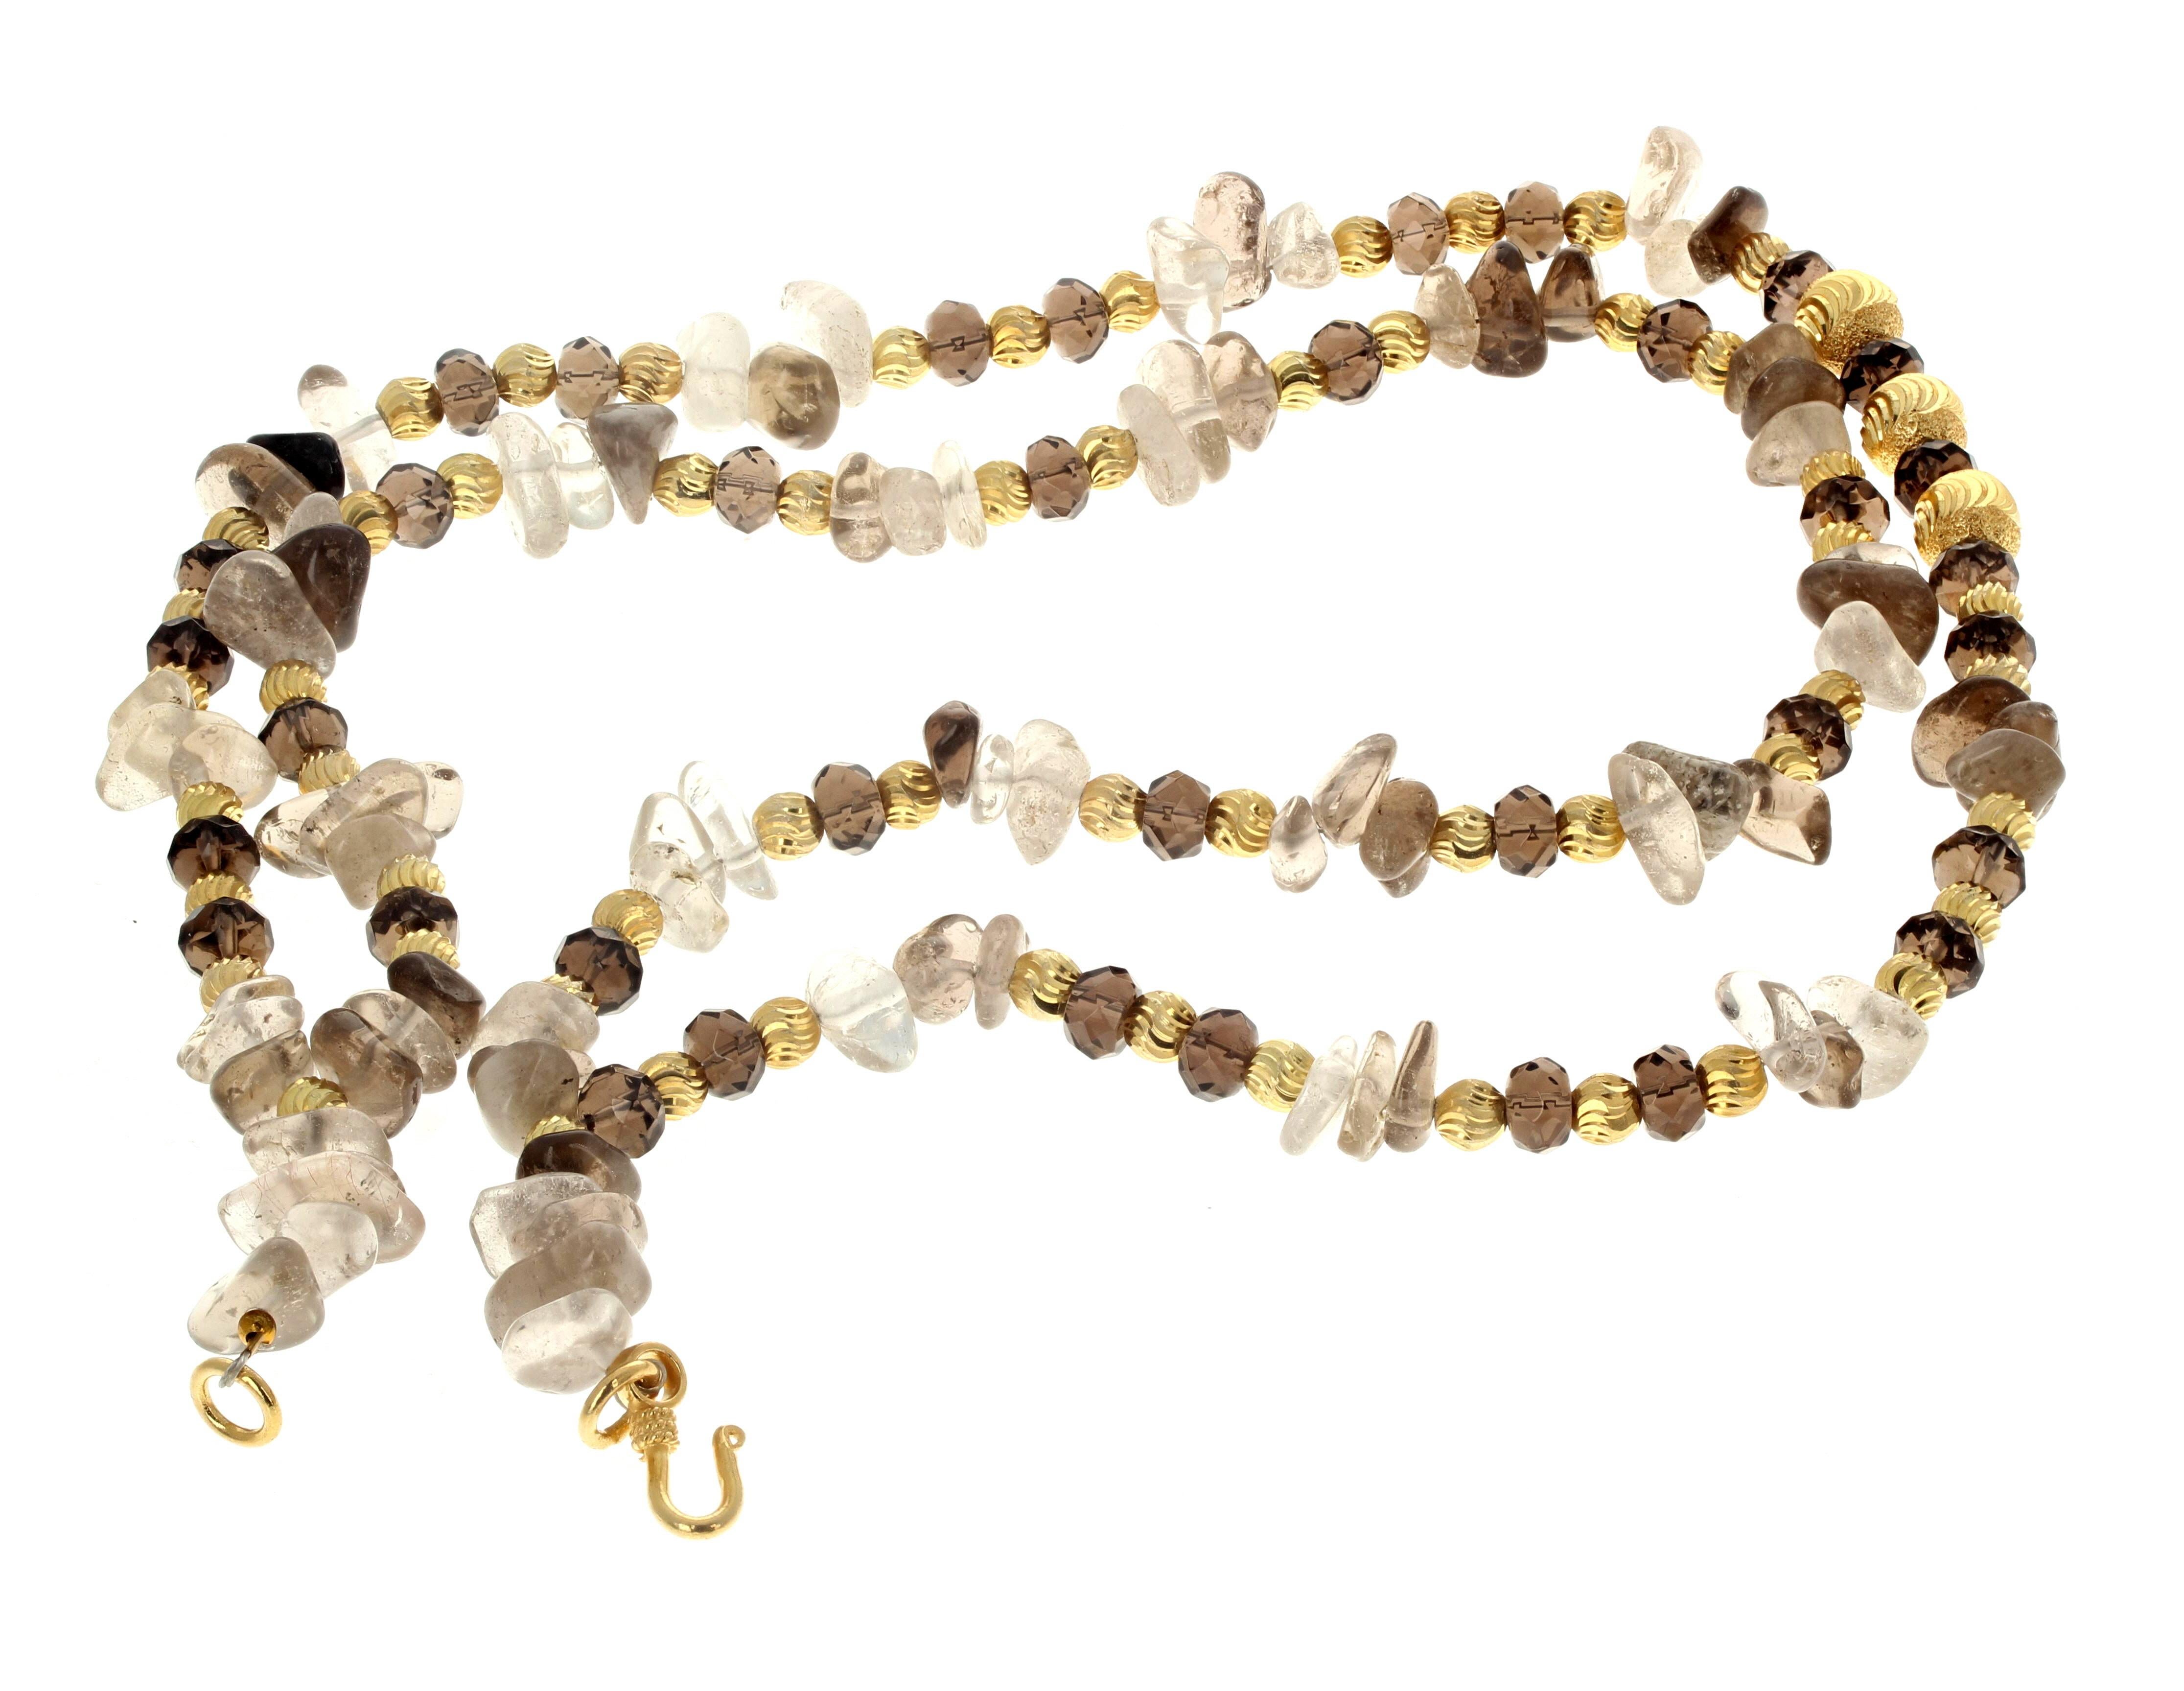 Fascinating Dark and Light Smoky Quartz adorned with intense gold plated decorative rondels make up this beautiful elegant 